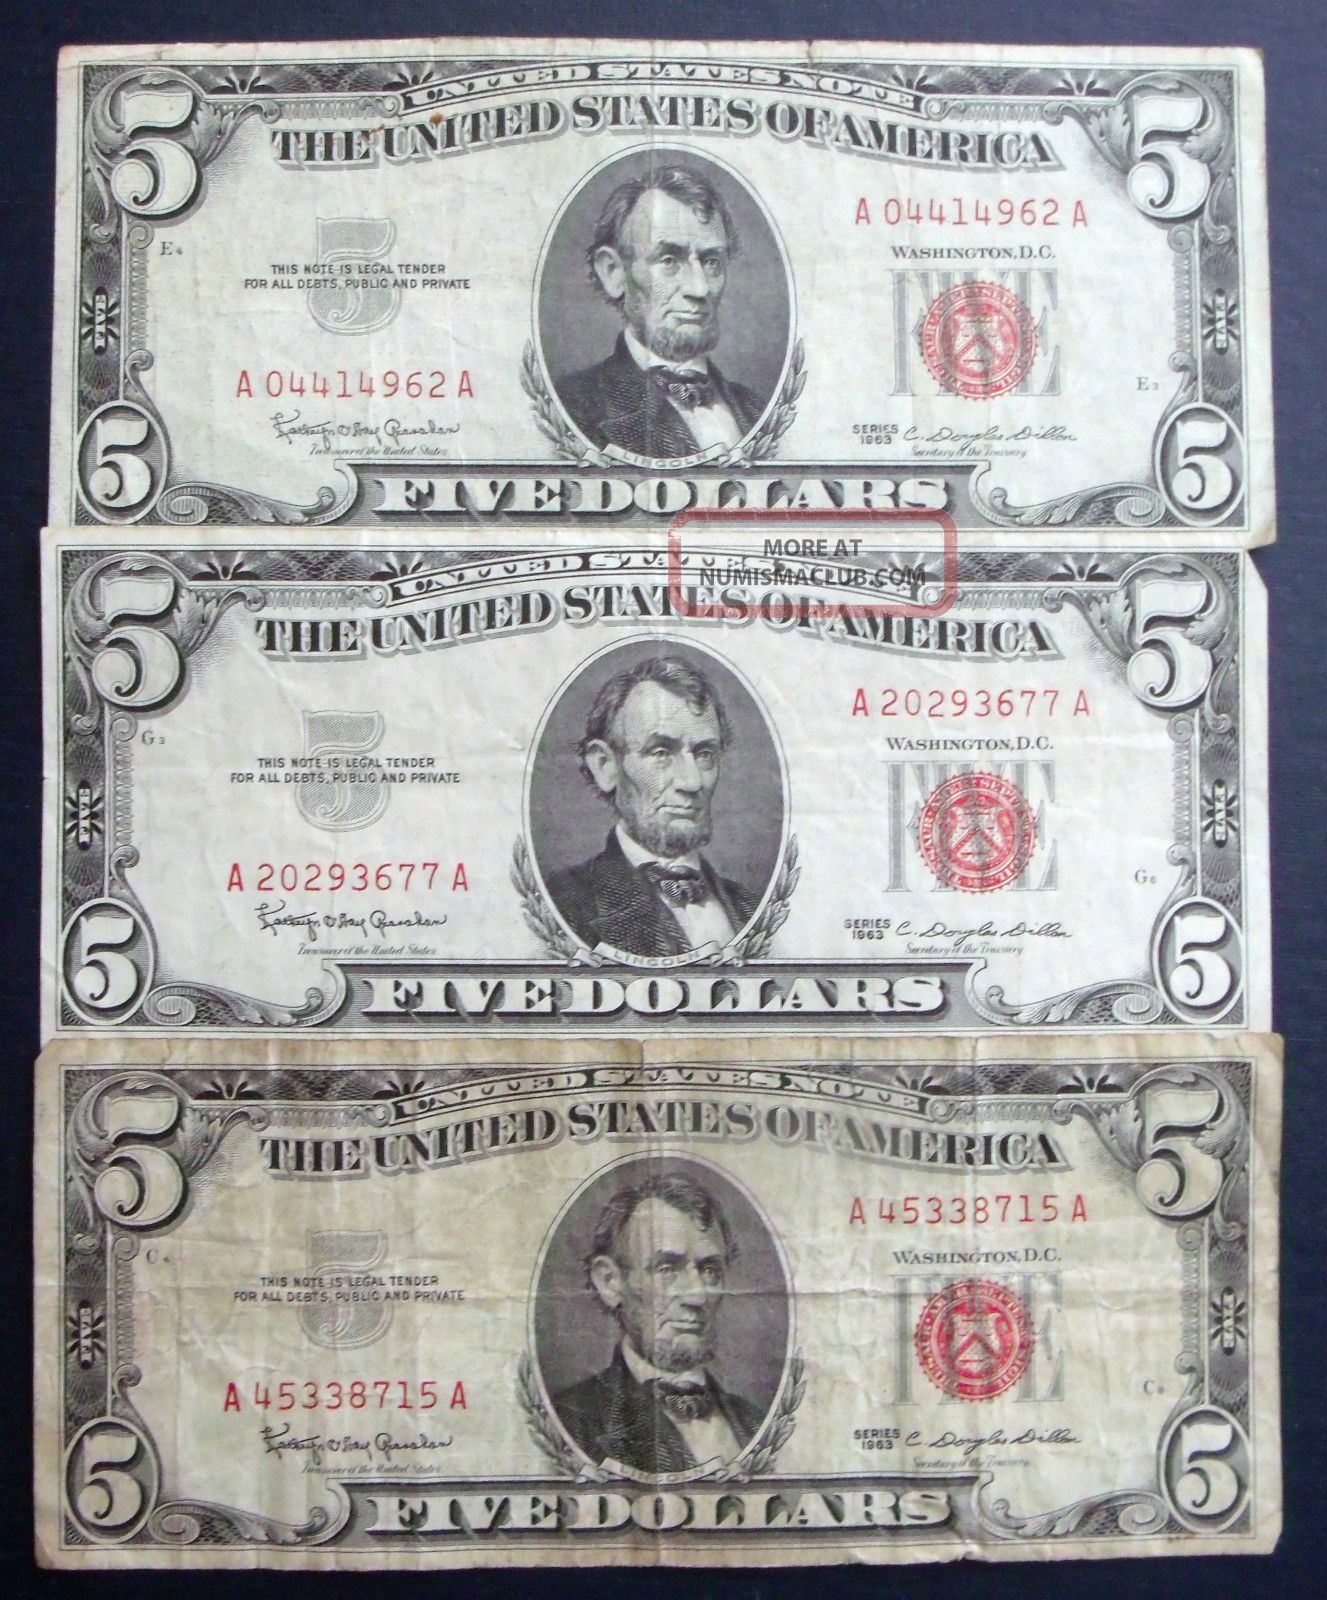 Three Red Seal 1963 $5 United States Notes (a45338715a) Small Size Notes photo